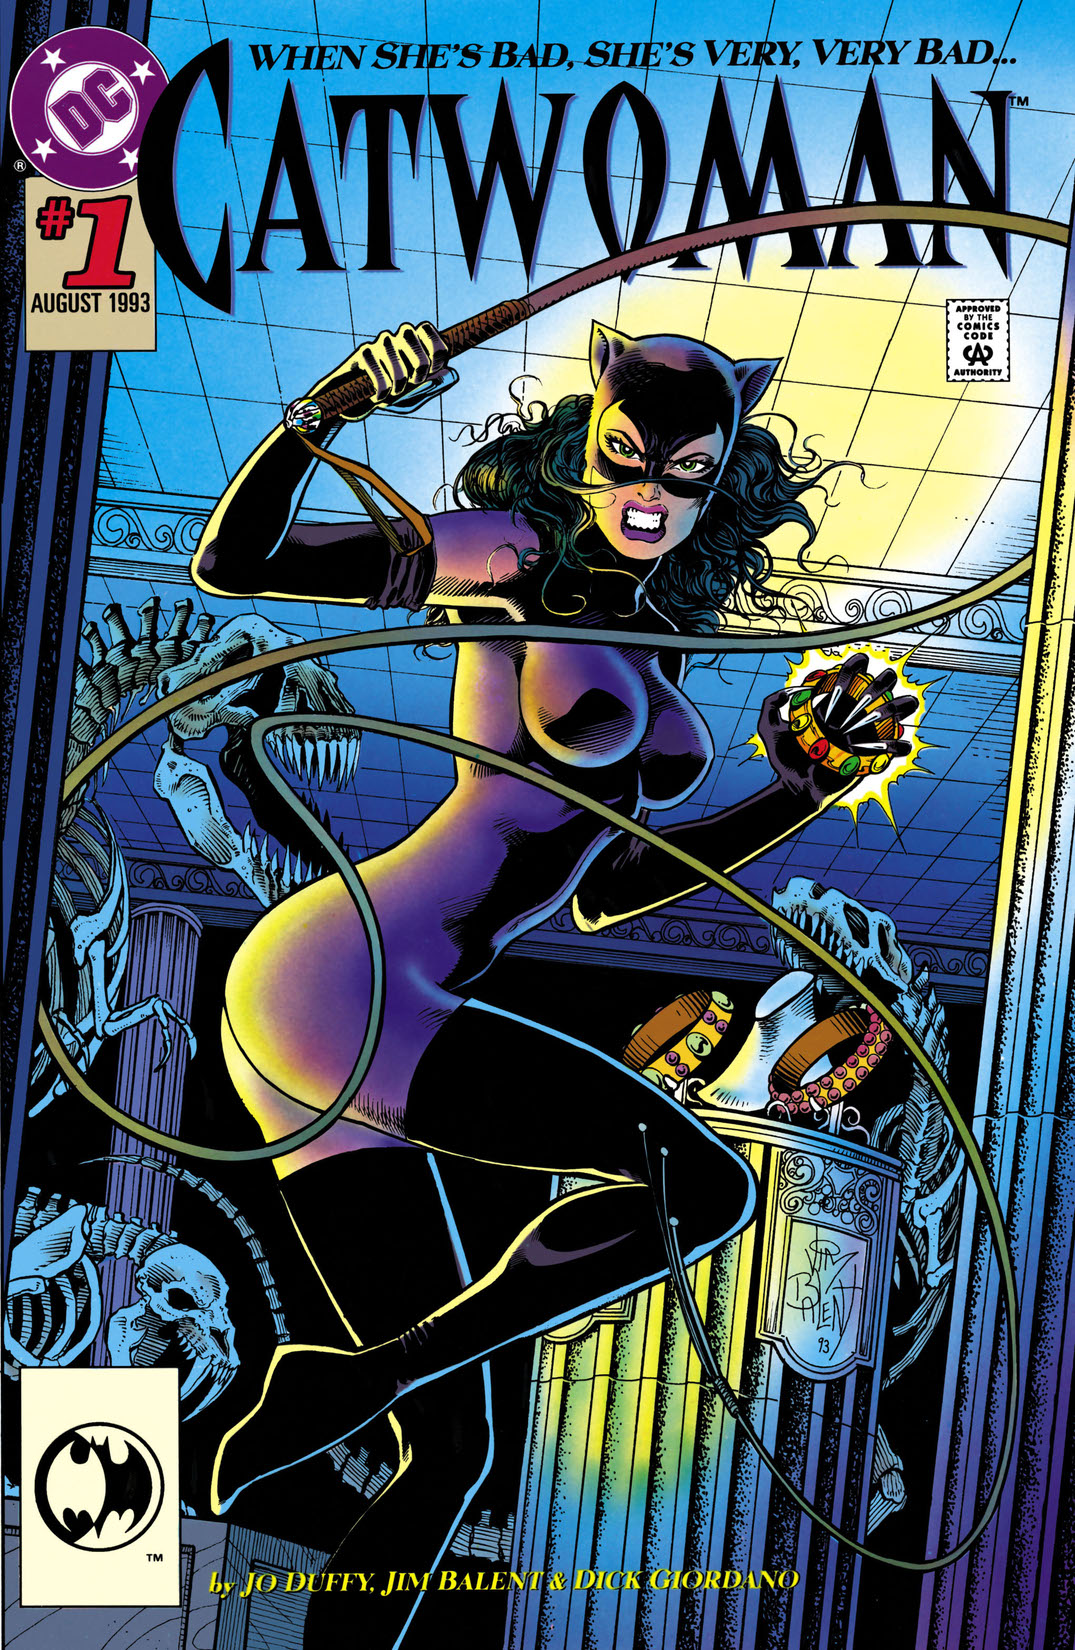 Catwoman (1993-) #1 preview images